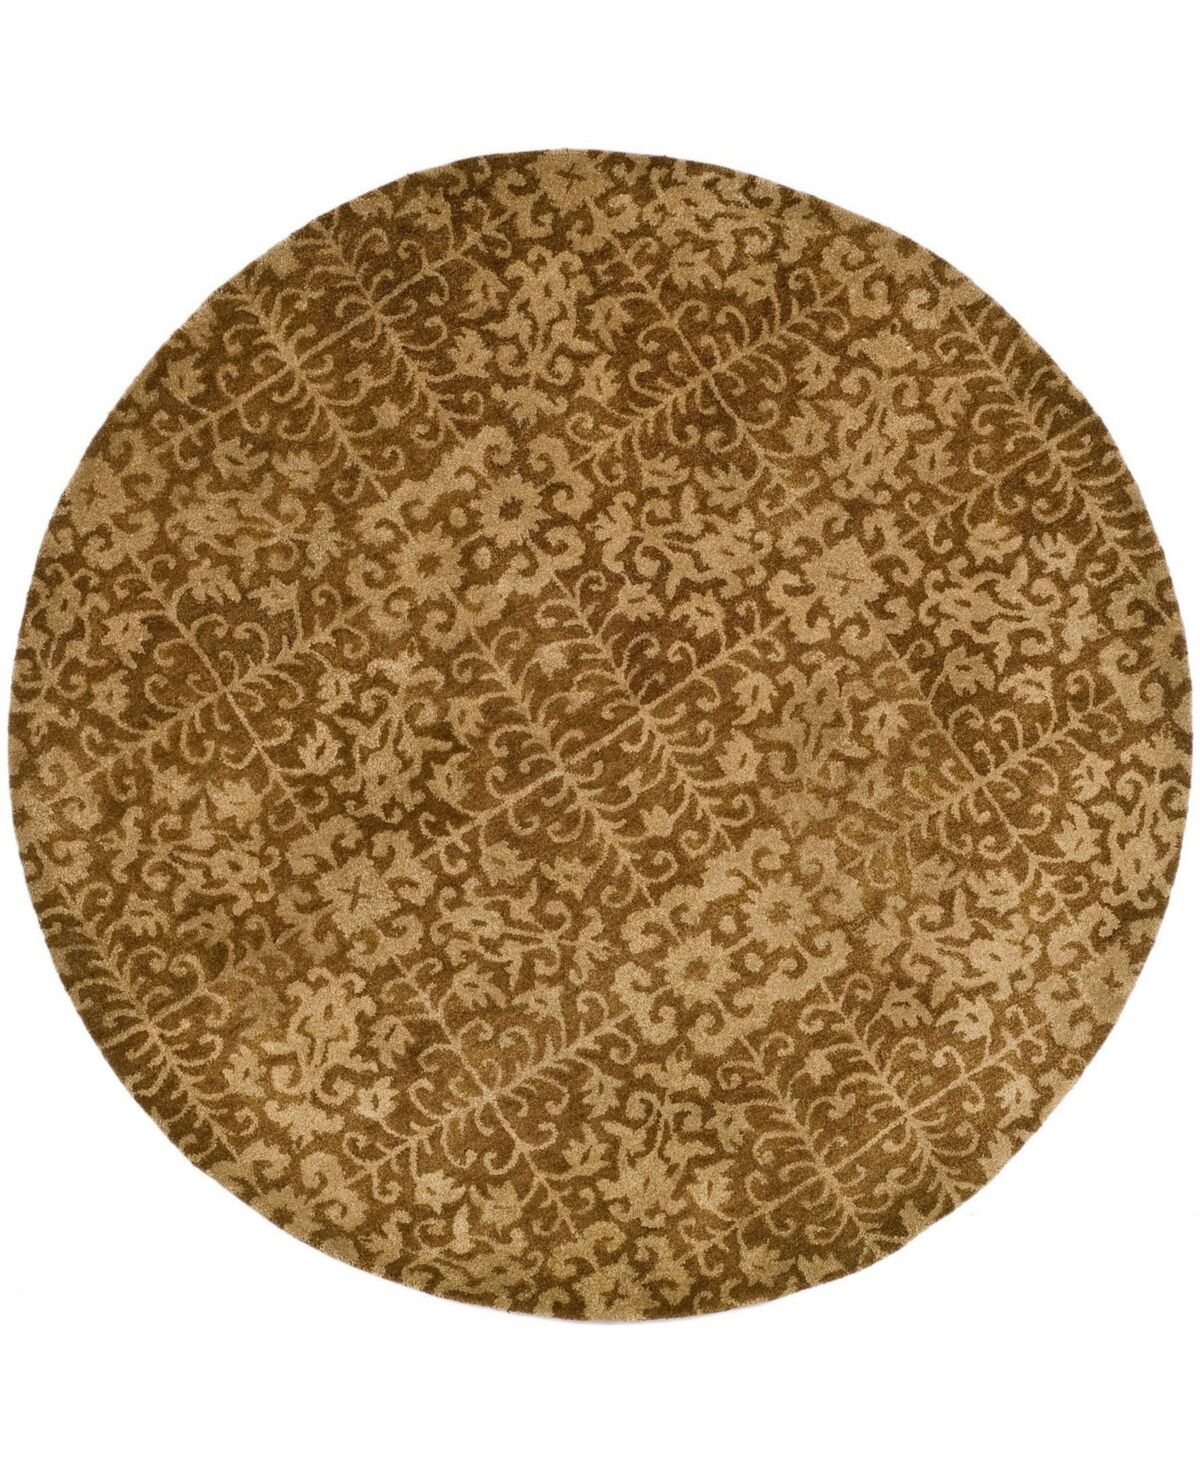 Safavieh Antiquity At411 Gold and Beige 8' x 8' Round Area Rug - Gold